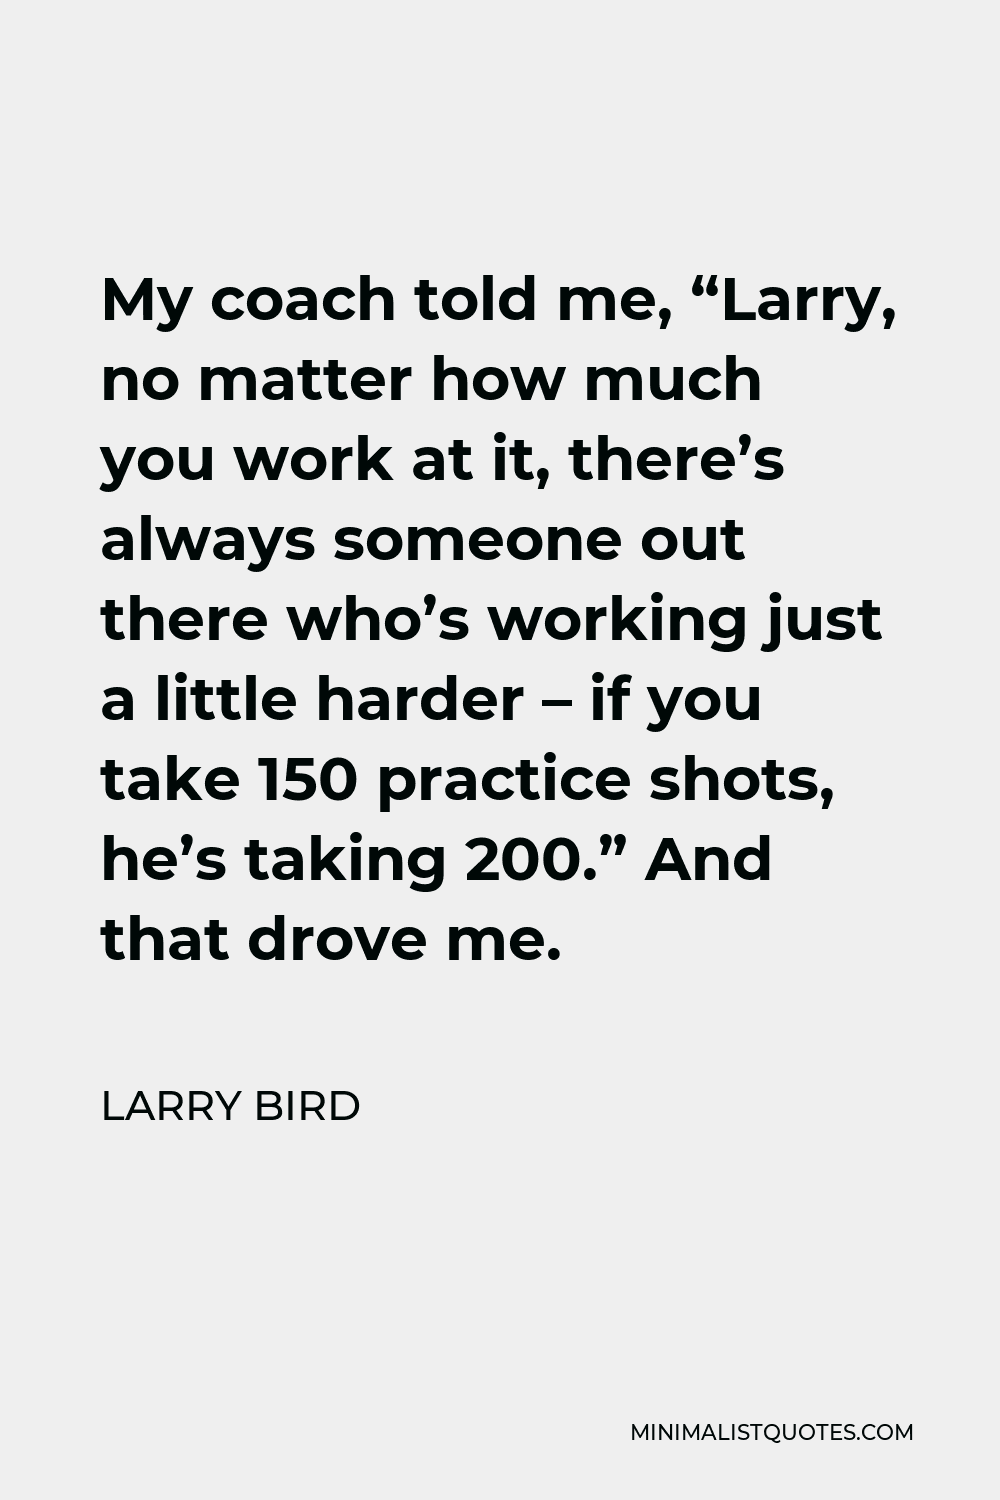 Larry Bird Quote - My coach told me, “Larry, no matter how much you work at it, there’s always someone out there who’s working just a little harder – if you take 150 practice shots, he’s taking 200.” And that drove me.